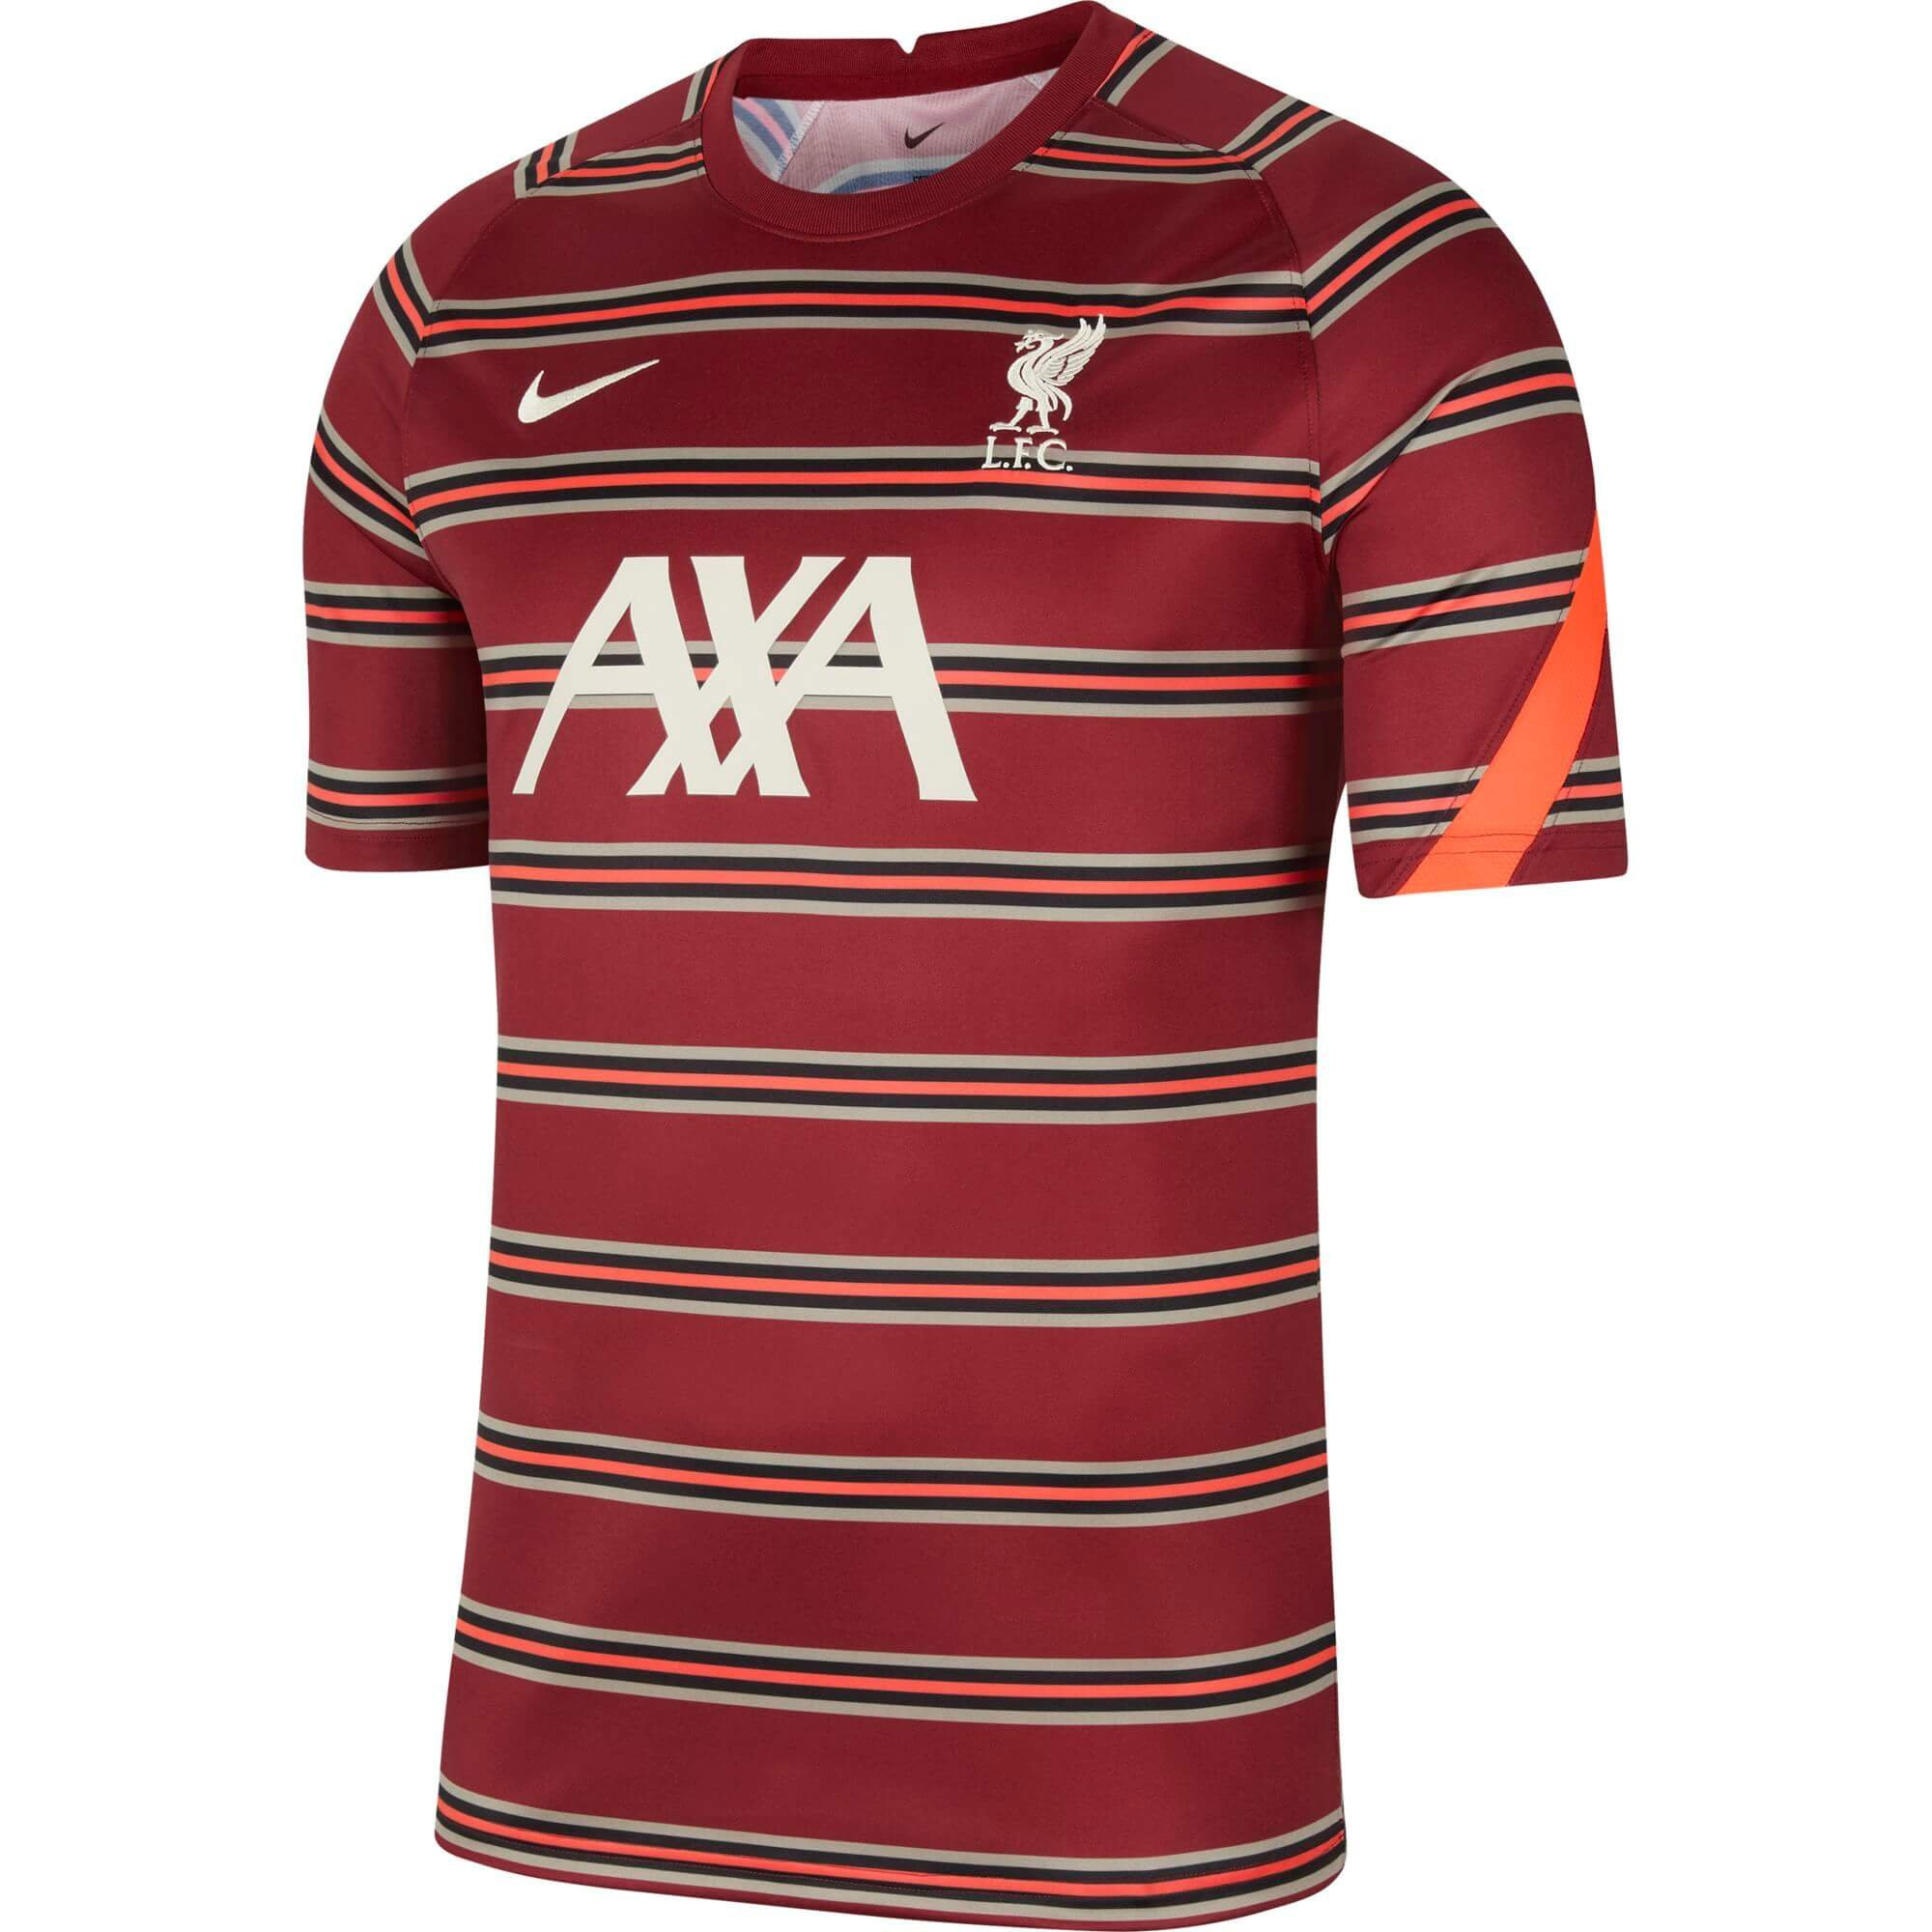 NIKE LIVERPOOL TRG JSY PRE MATCH ROUGE 2021/2022